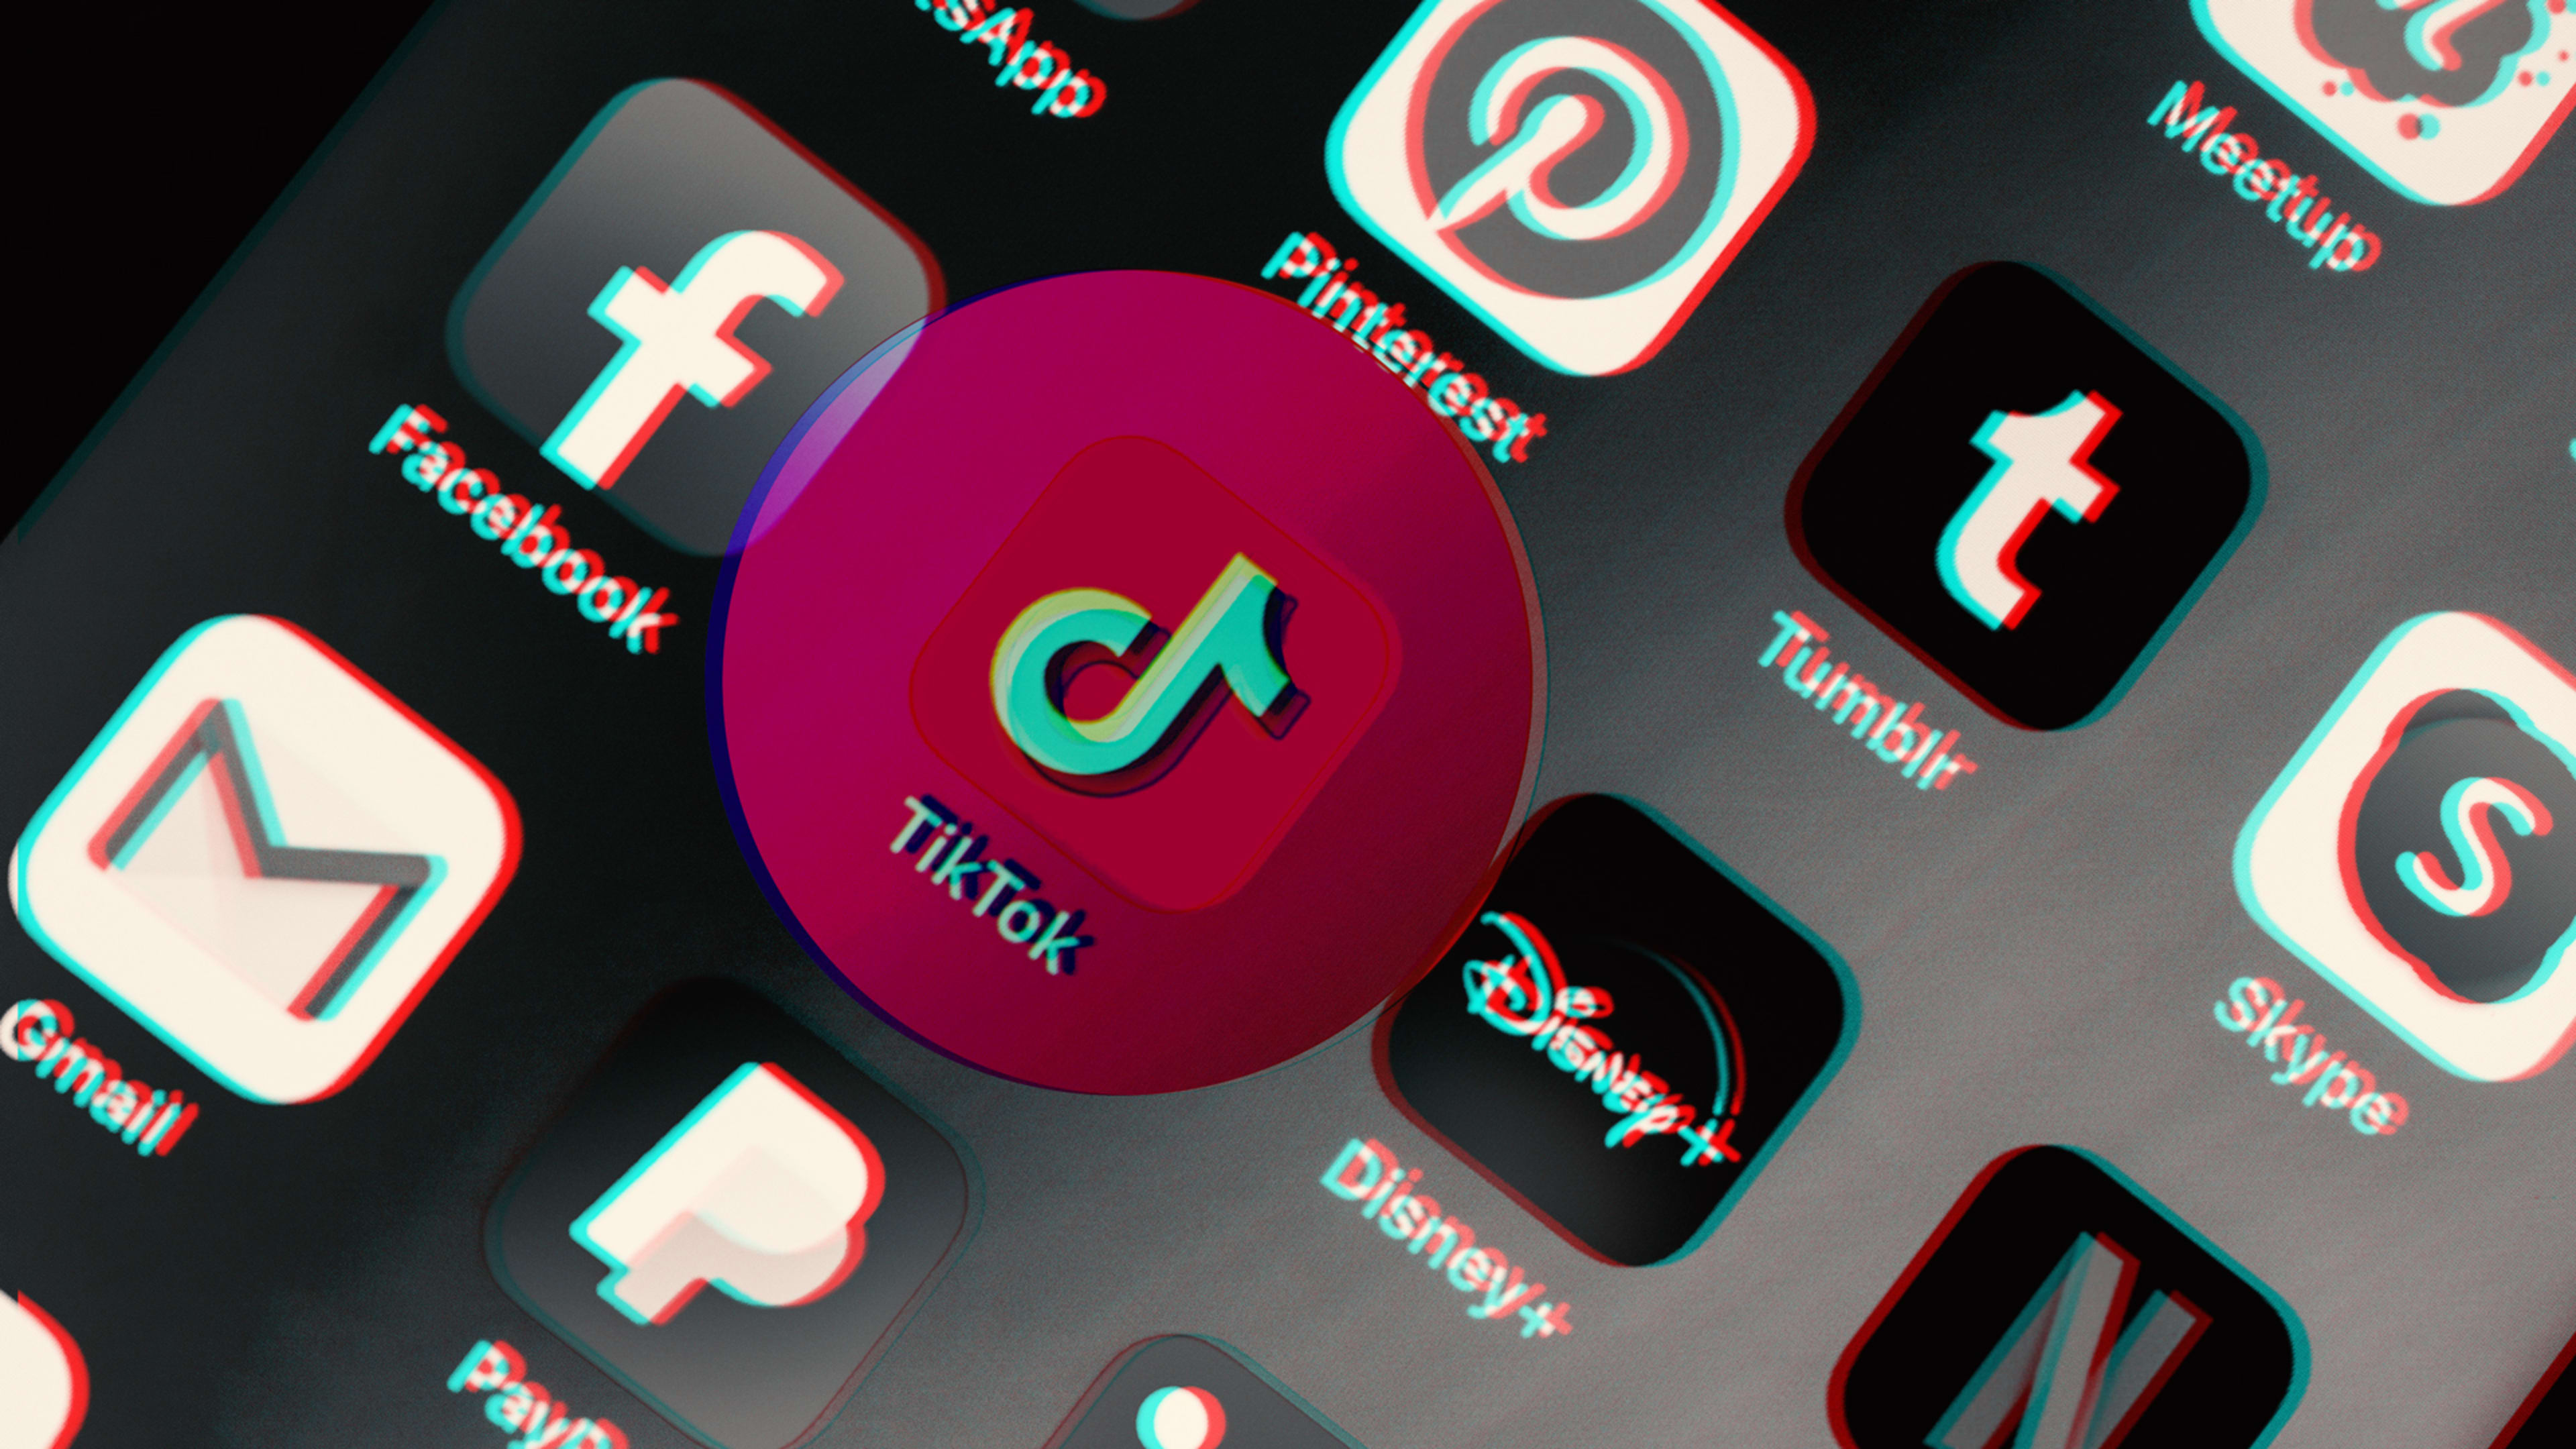 Amazon tells employees to take TikTok off their phones: report (Then says it didn’t mean to tell them that)